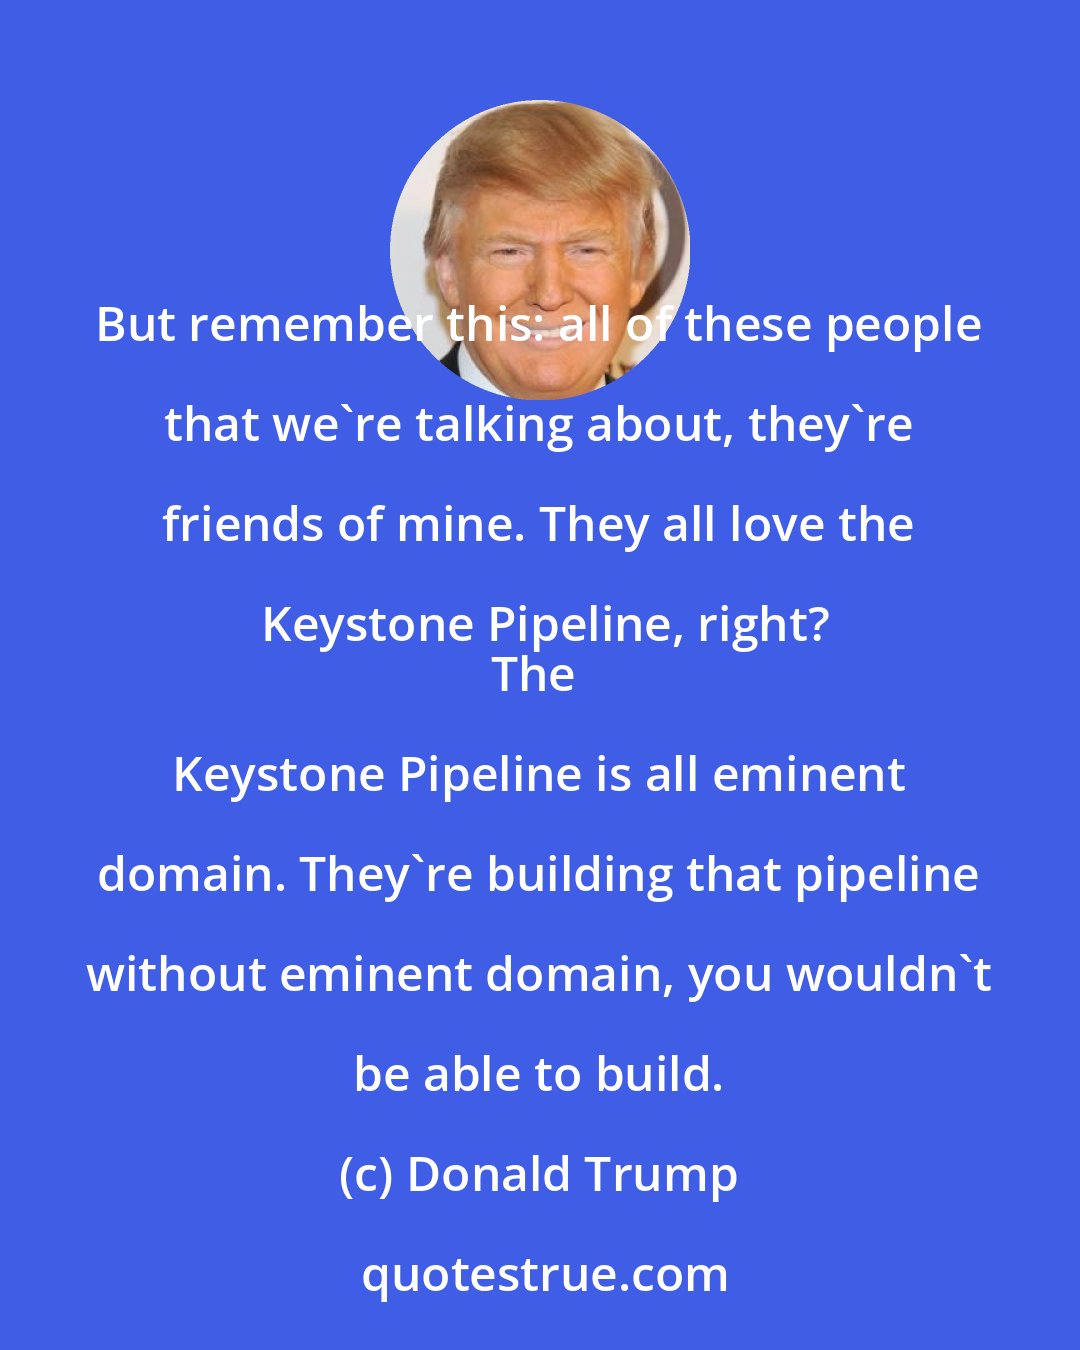 Donald Trump: But remember this: all of these people that we're talking about, they're friends of mine. They all love the Keystone Pipeline, right?
The Keystone Pipeline is all eminent domain. They're building that pipeline without eminent domain, you wouldn't be able to build.